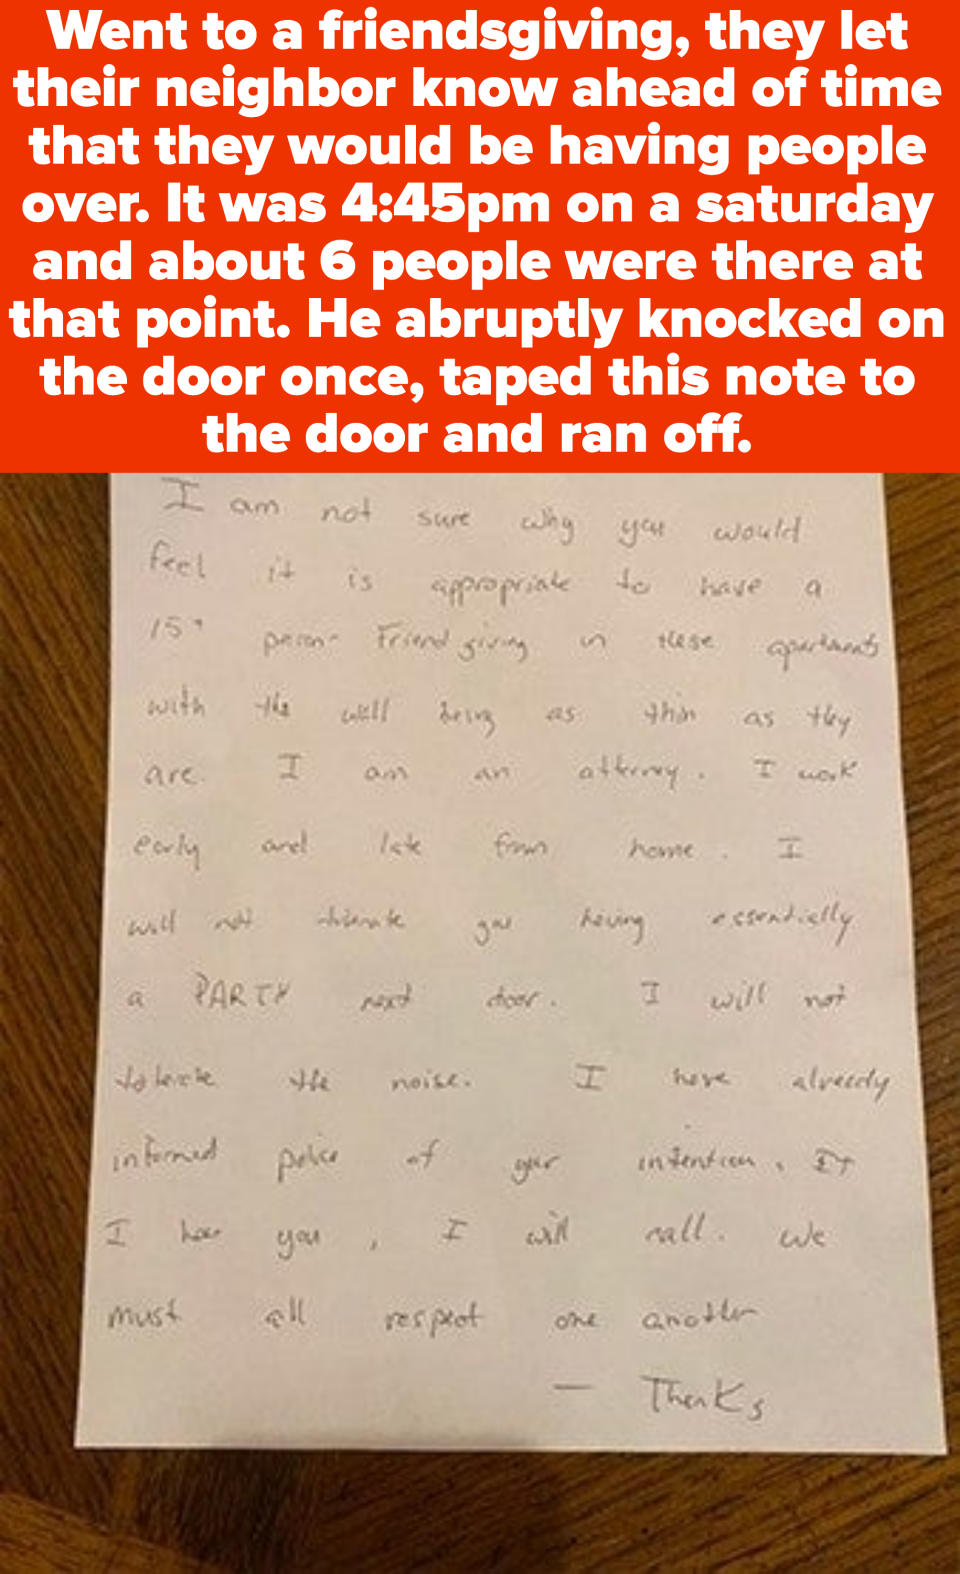 A note attached to someone's door during a small Friendsgiving